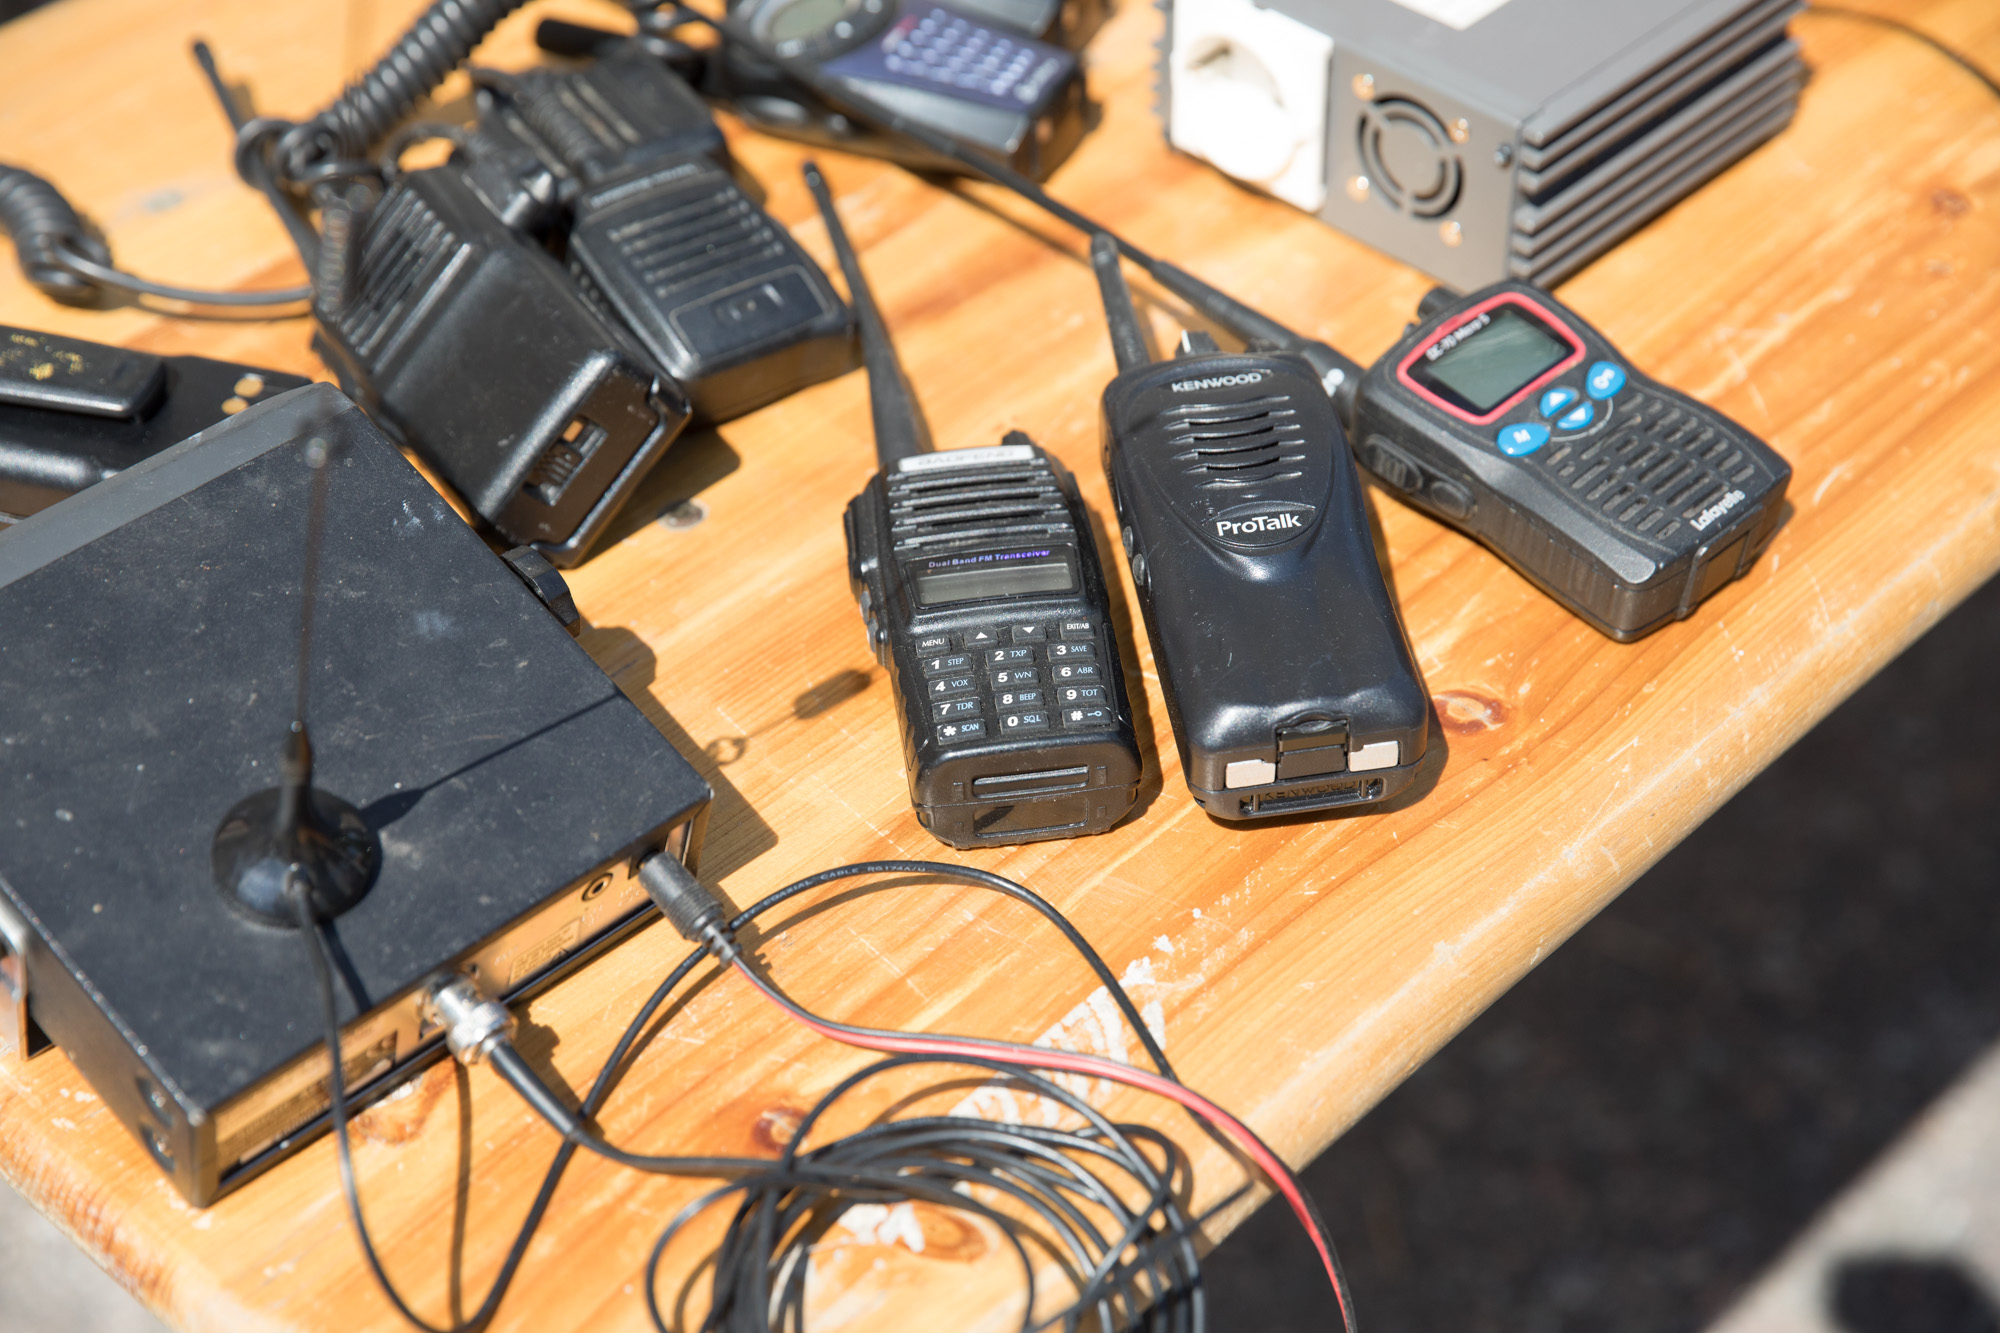 Different kinds of communications equipment